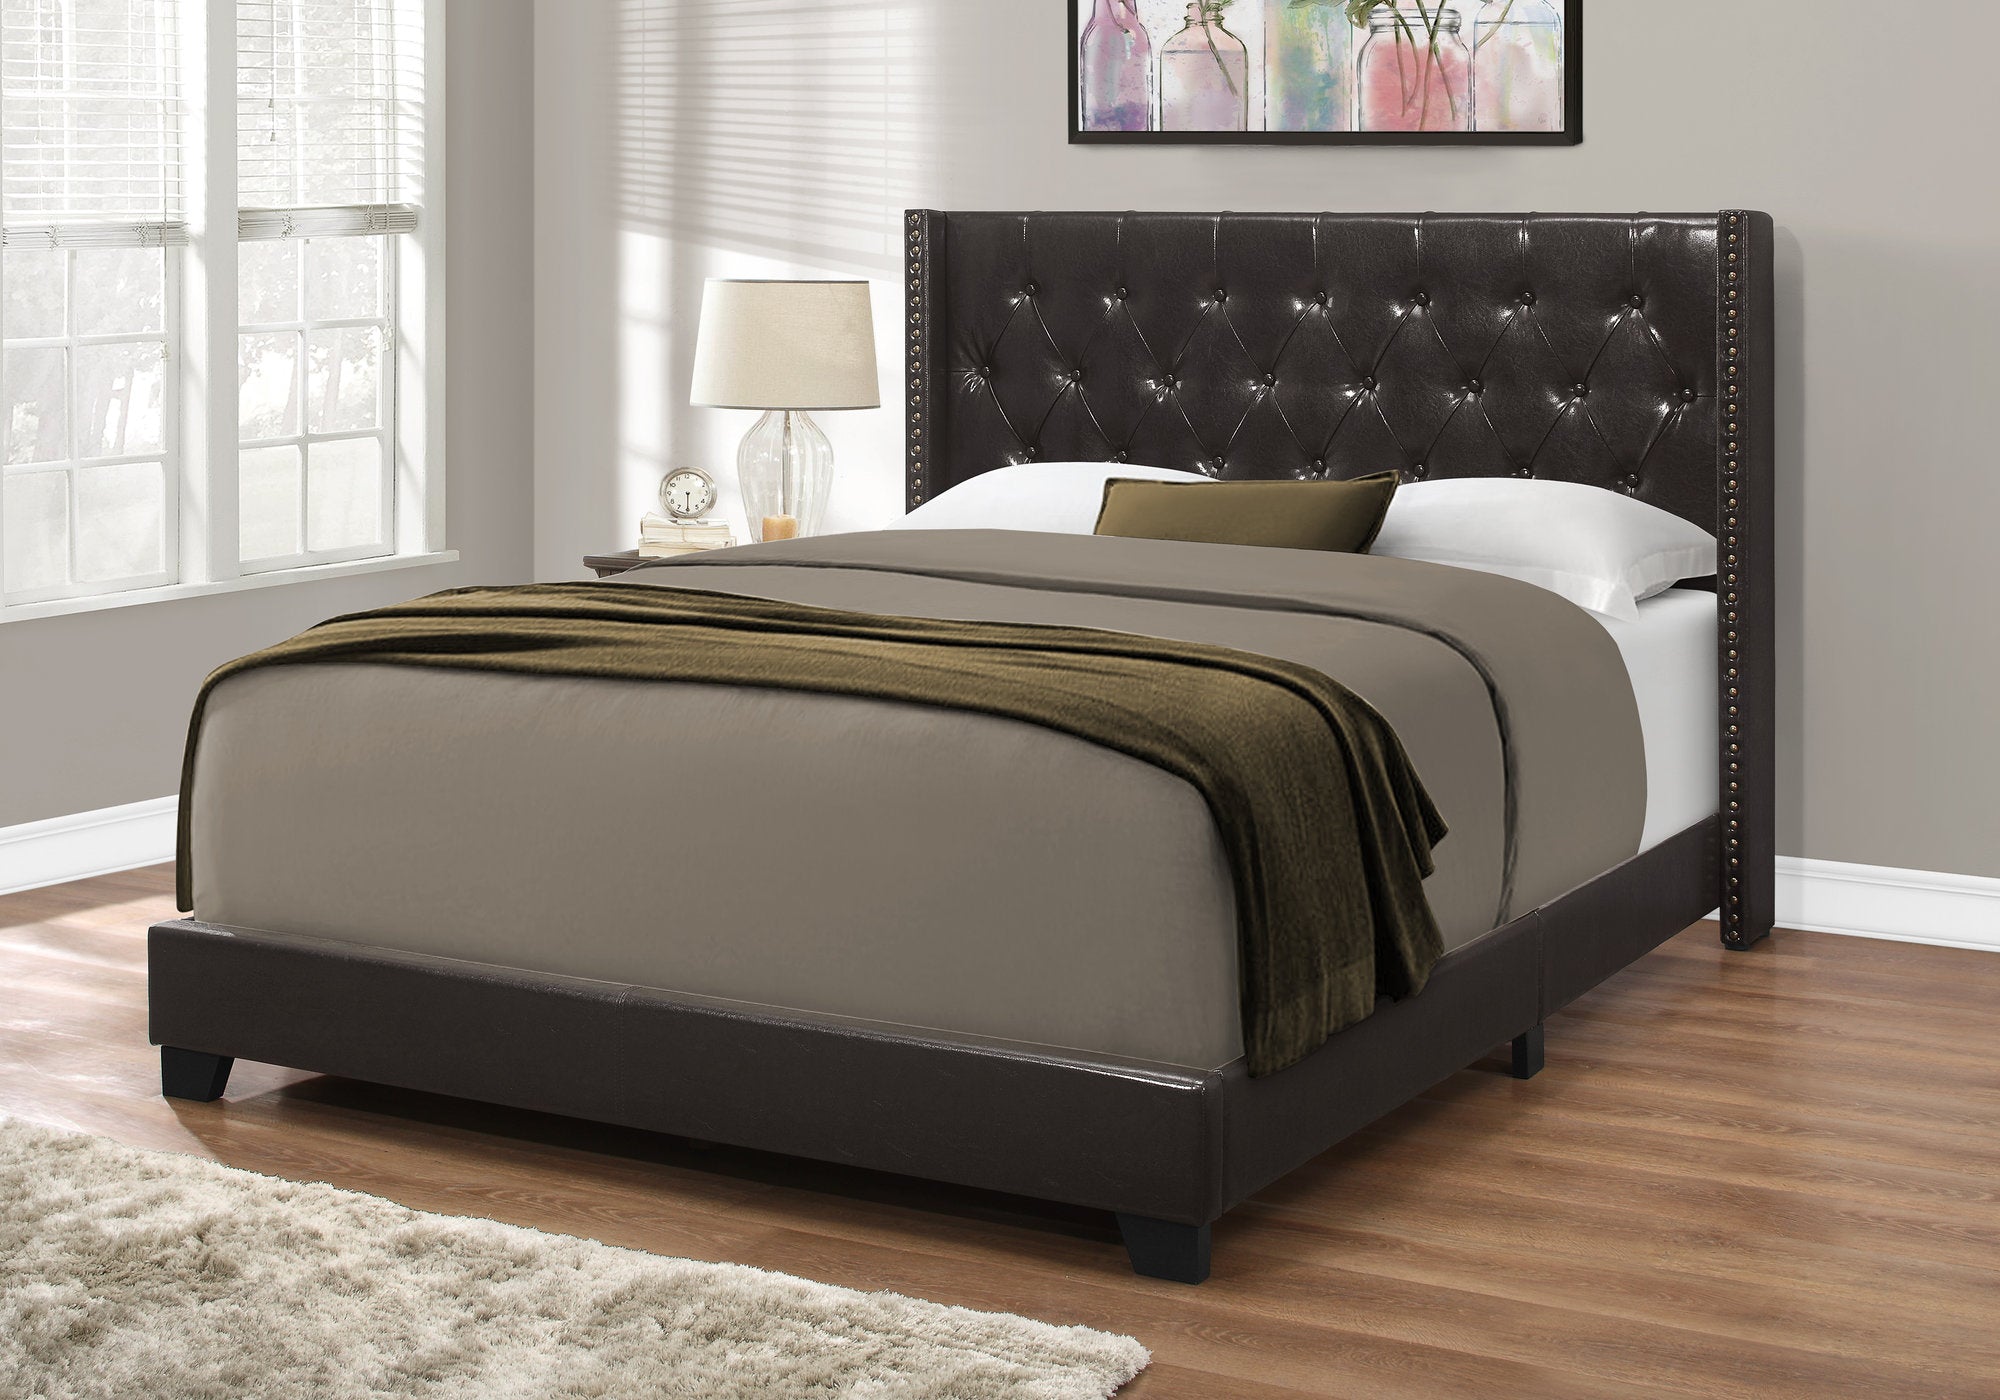 bed queen size brown leather look with brass trim i5987q